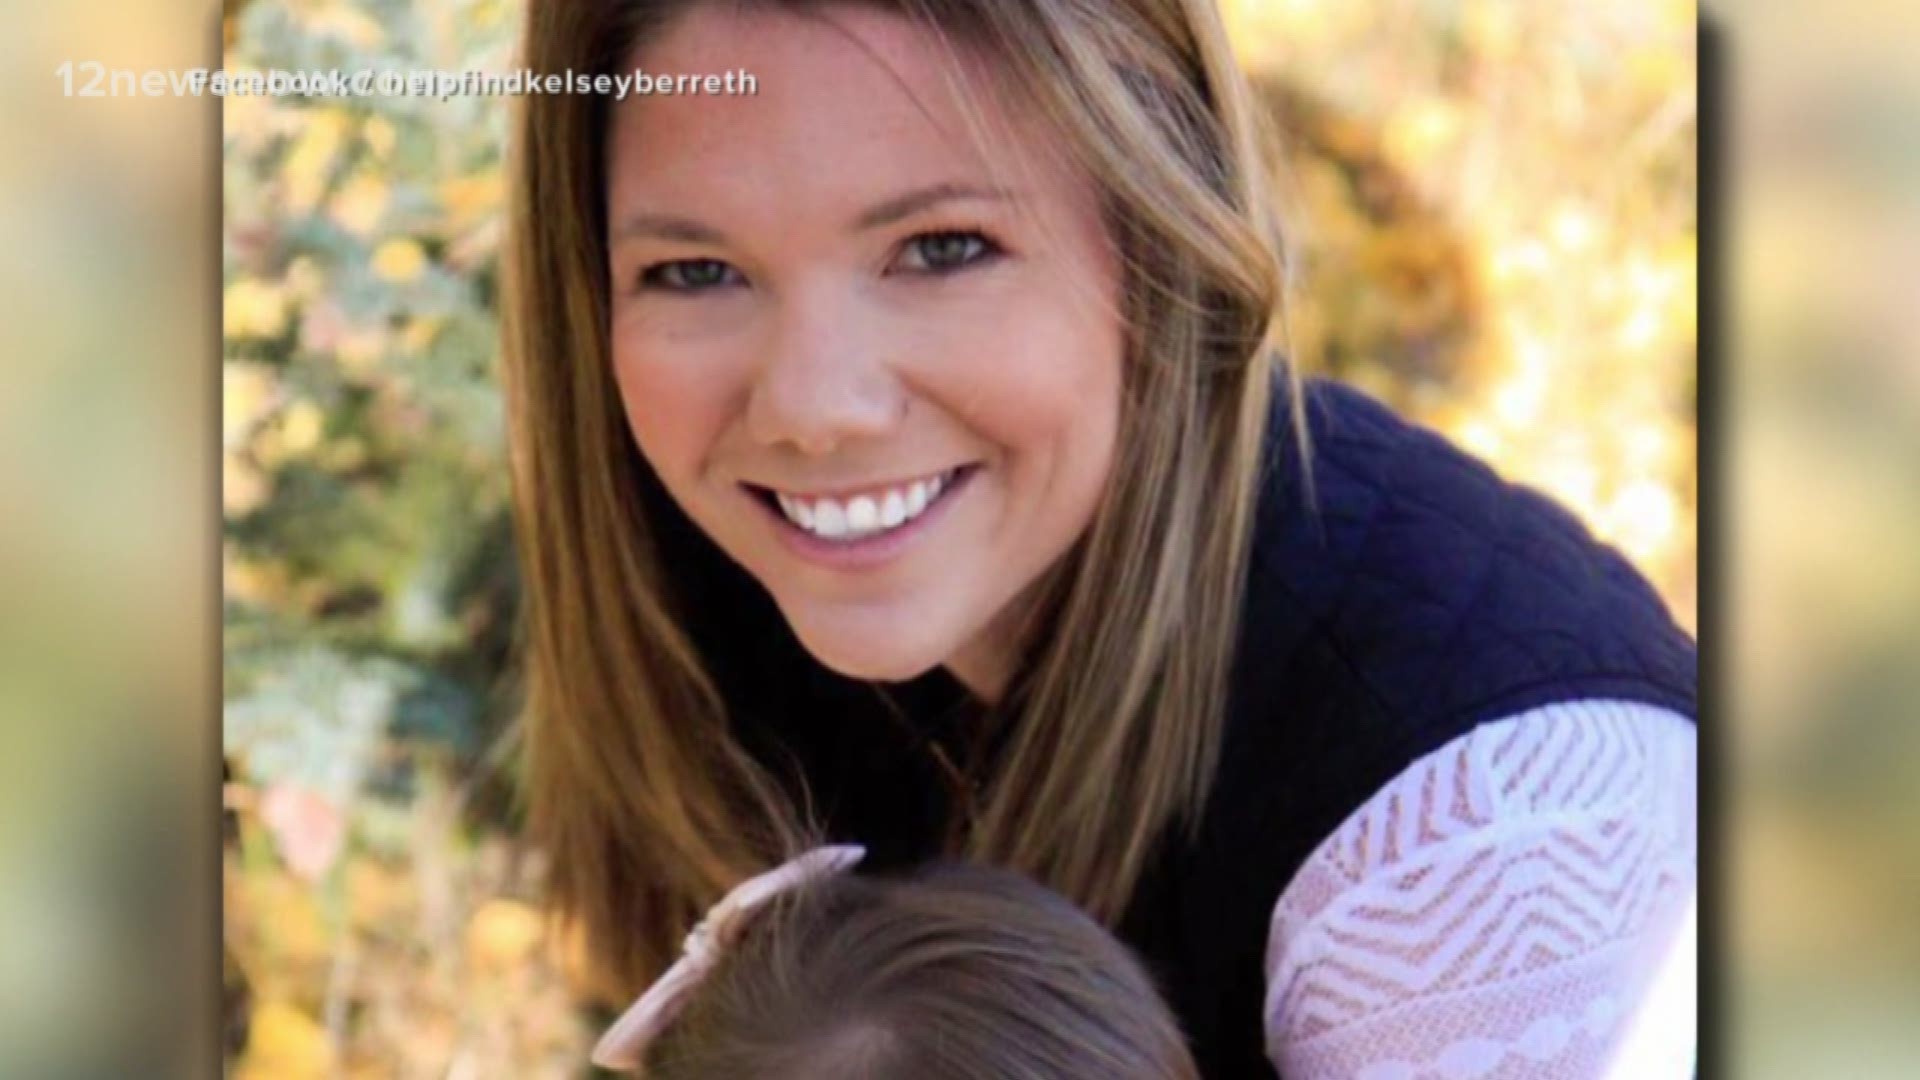 Patrick Frazee, husband of missing Colorado woman, Kelsey Berreth, to appear in court after he is charged with first degree murder. Judge to determine if there is enough evidence to to go forth with trial.